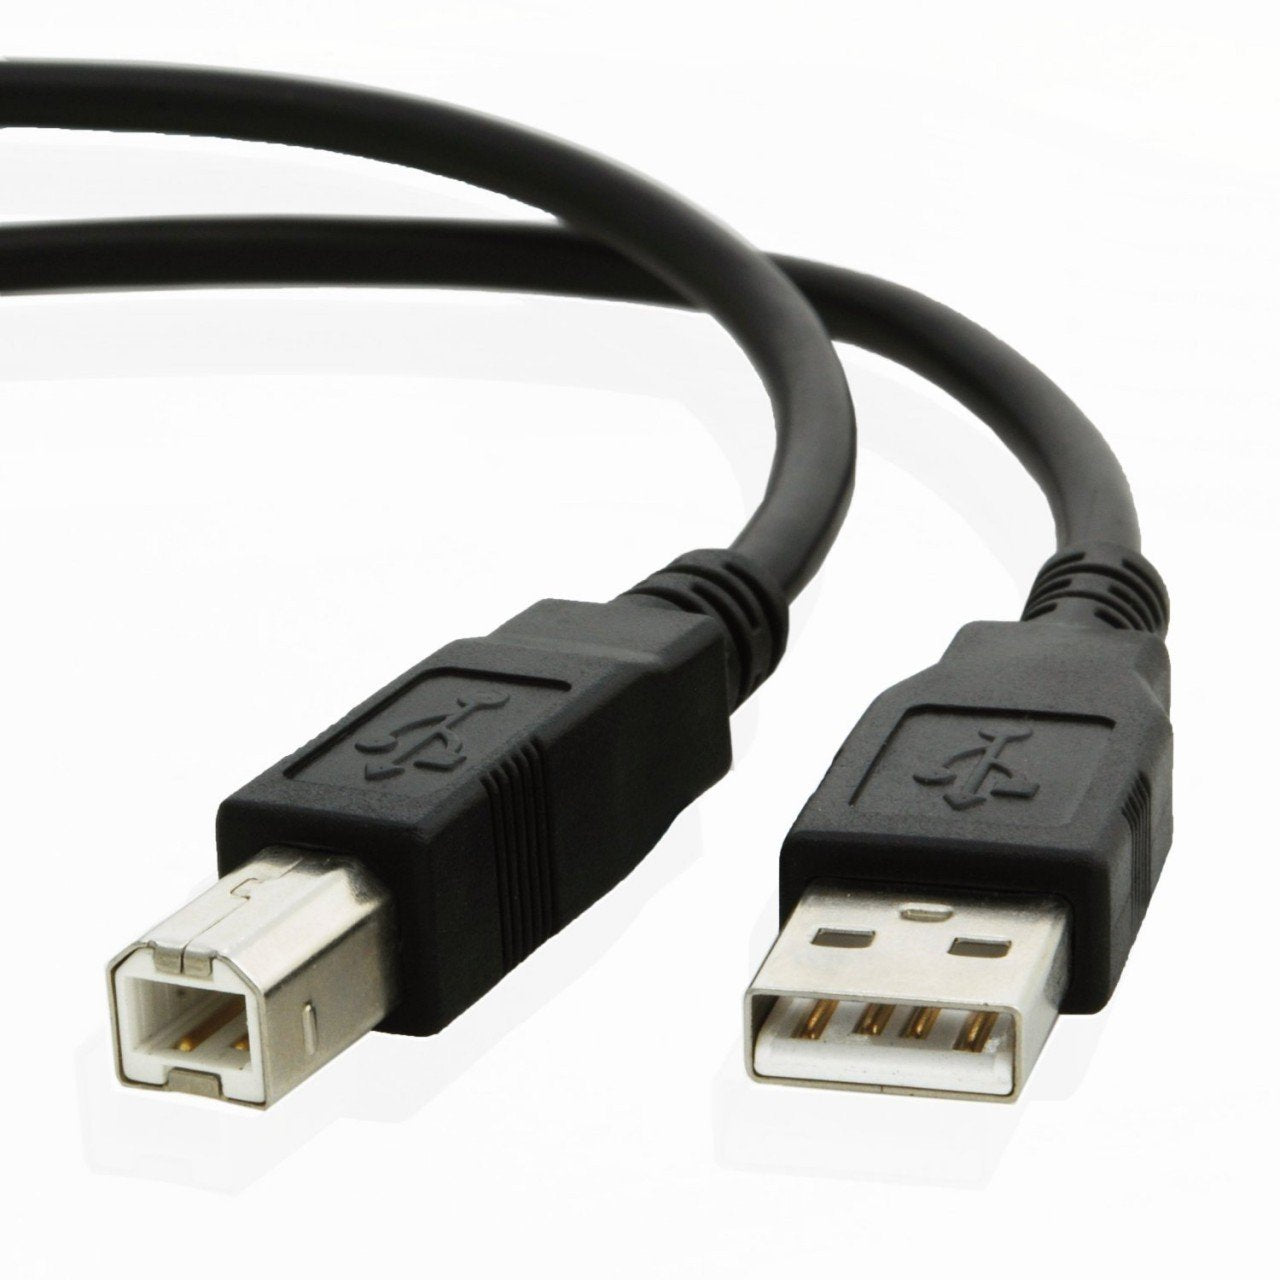 USB cable for Aphex Mic X